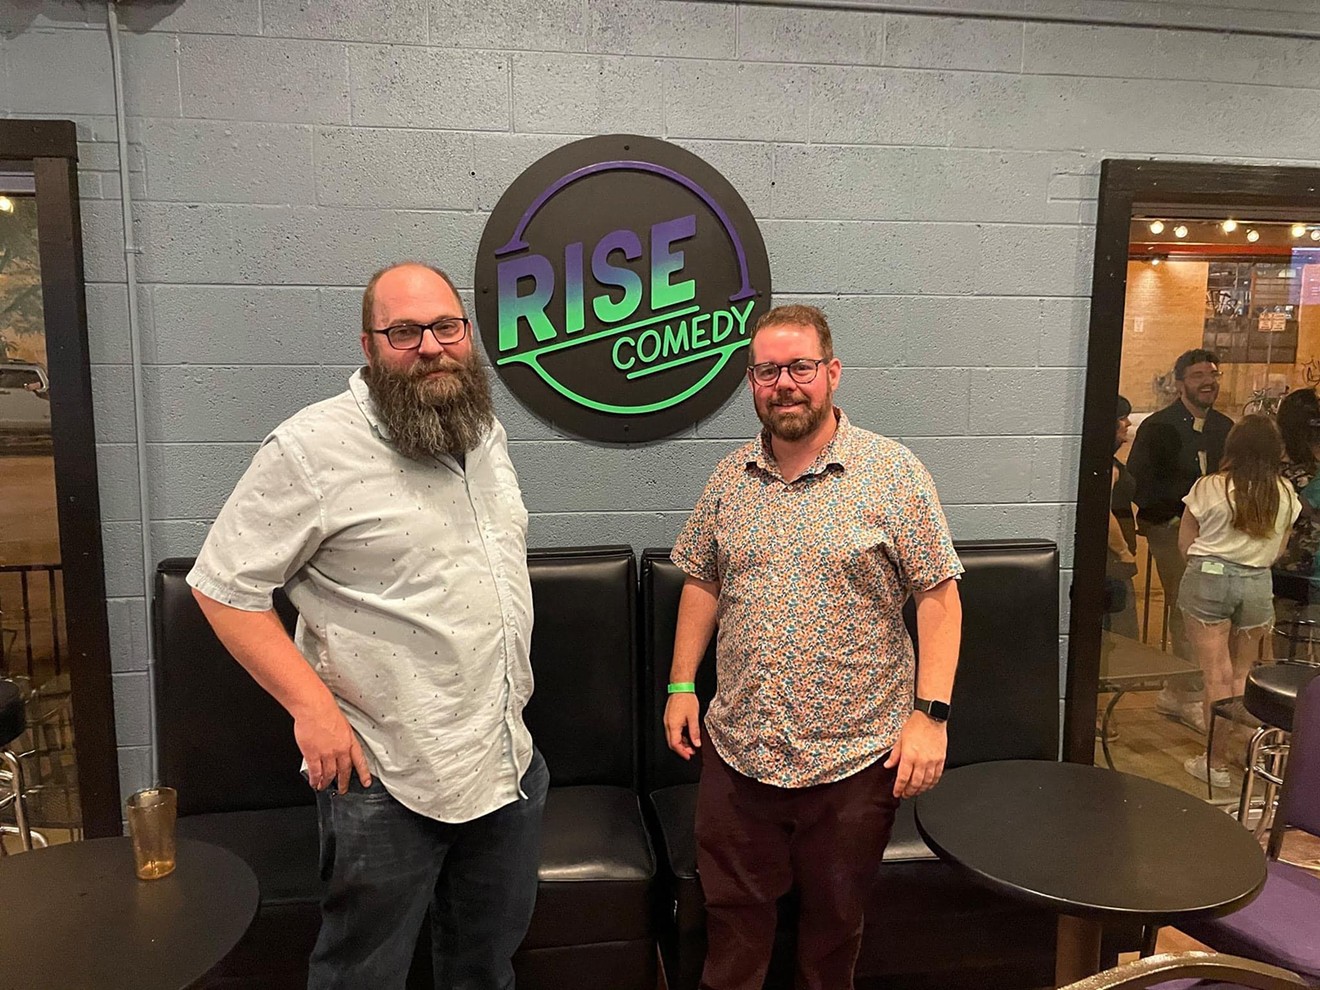 Nick Armstrong and Josh Nichols bought Voodoo Comedy in 2019 and renamed it Rise Comedy in 2020.